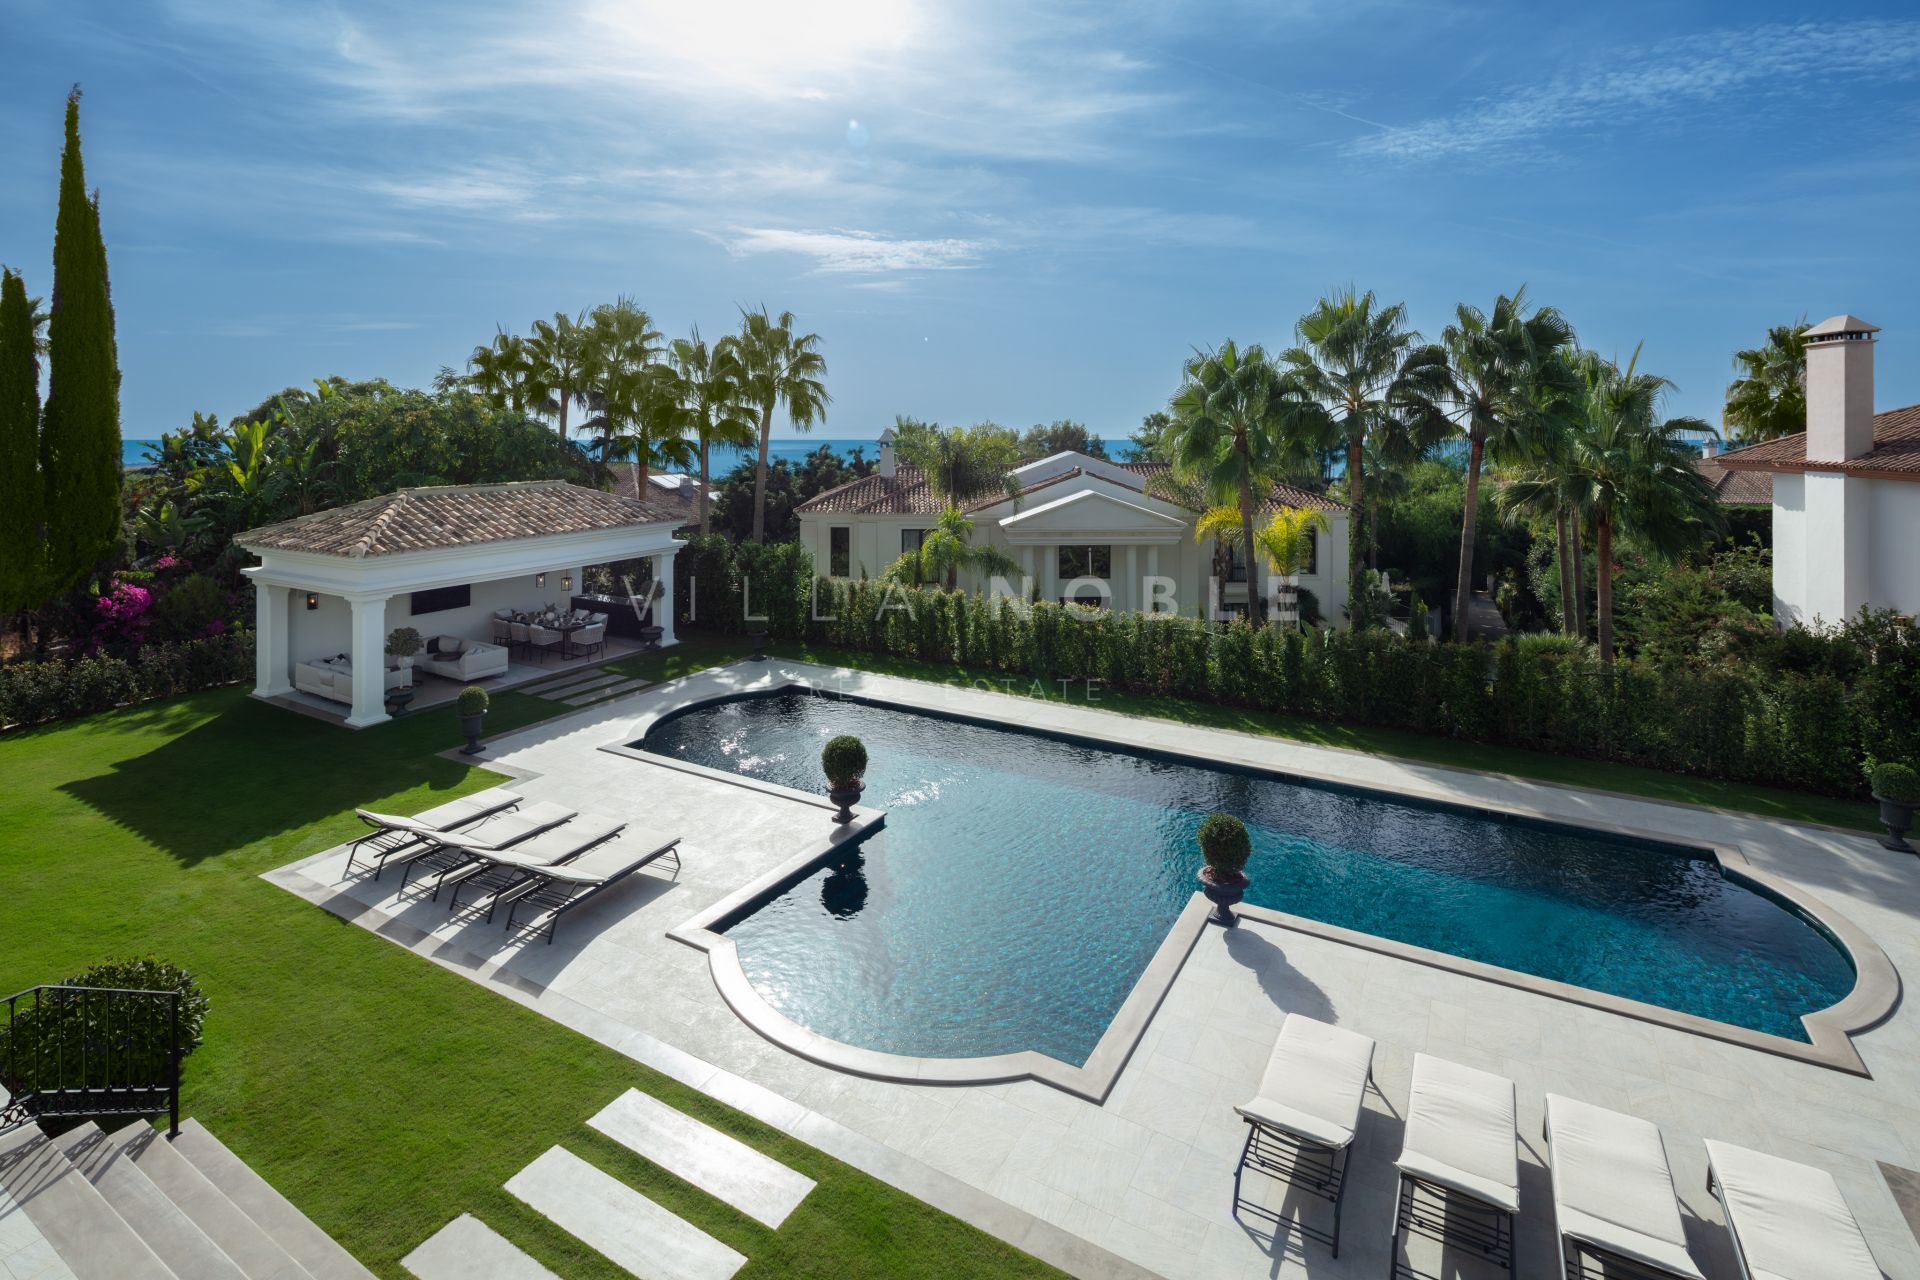 High-quality family home in the exclusive and gated Sierra Blanca community, Marbella